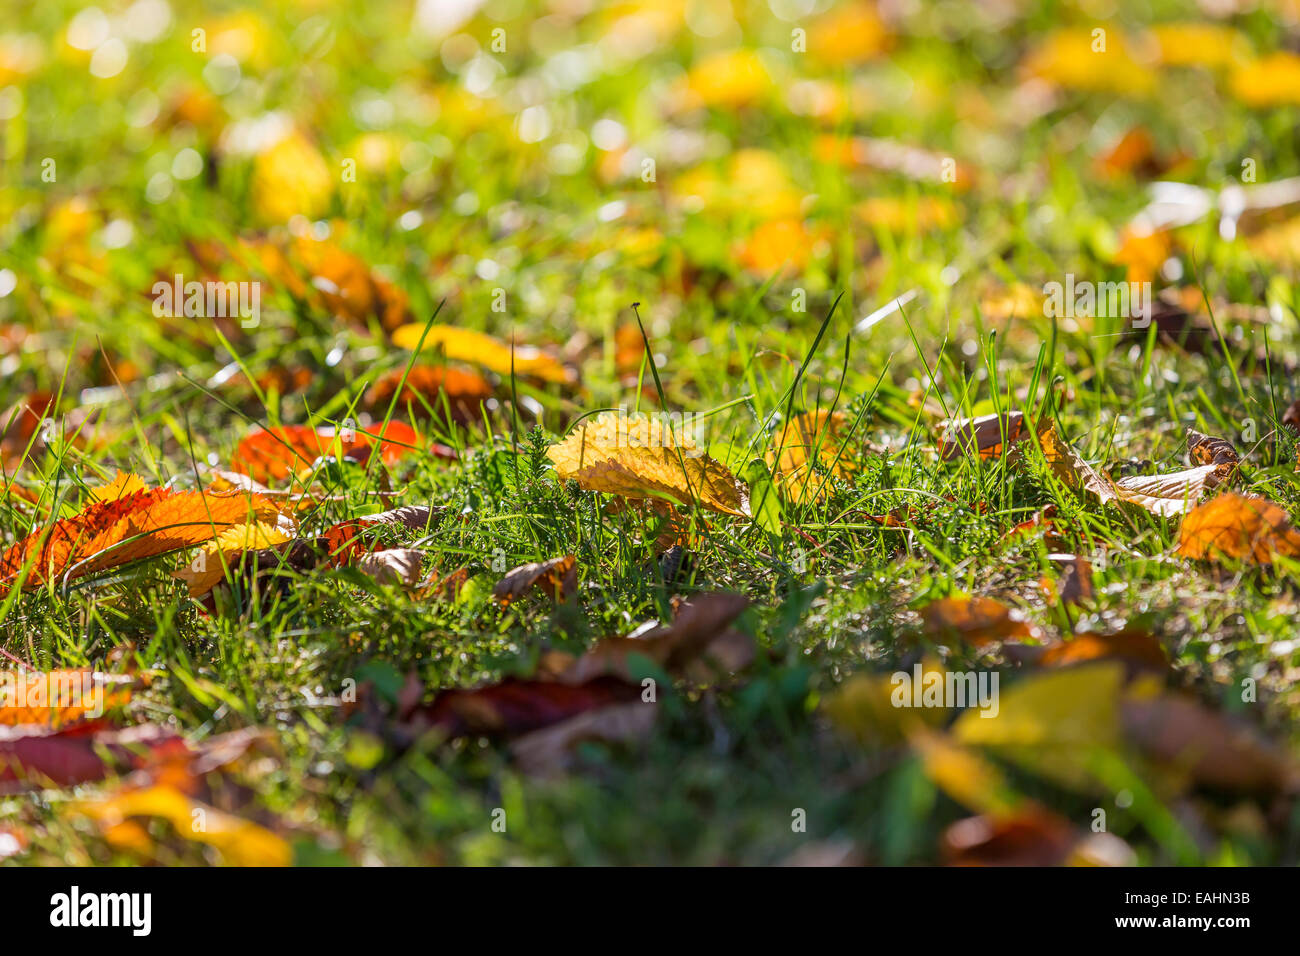 Close up lawn with fallen autumnal leaves Stock Photo